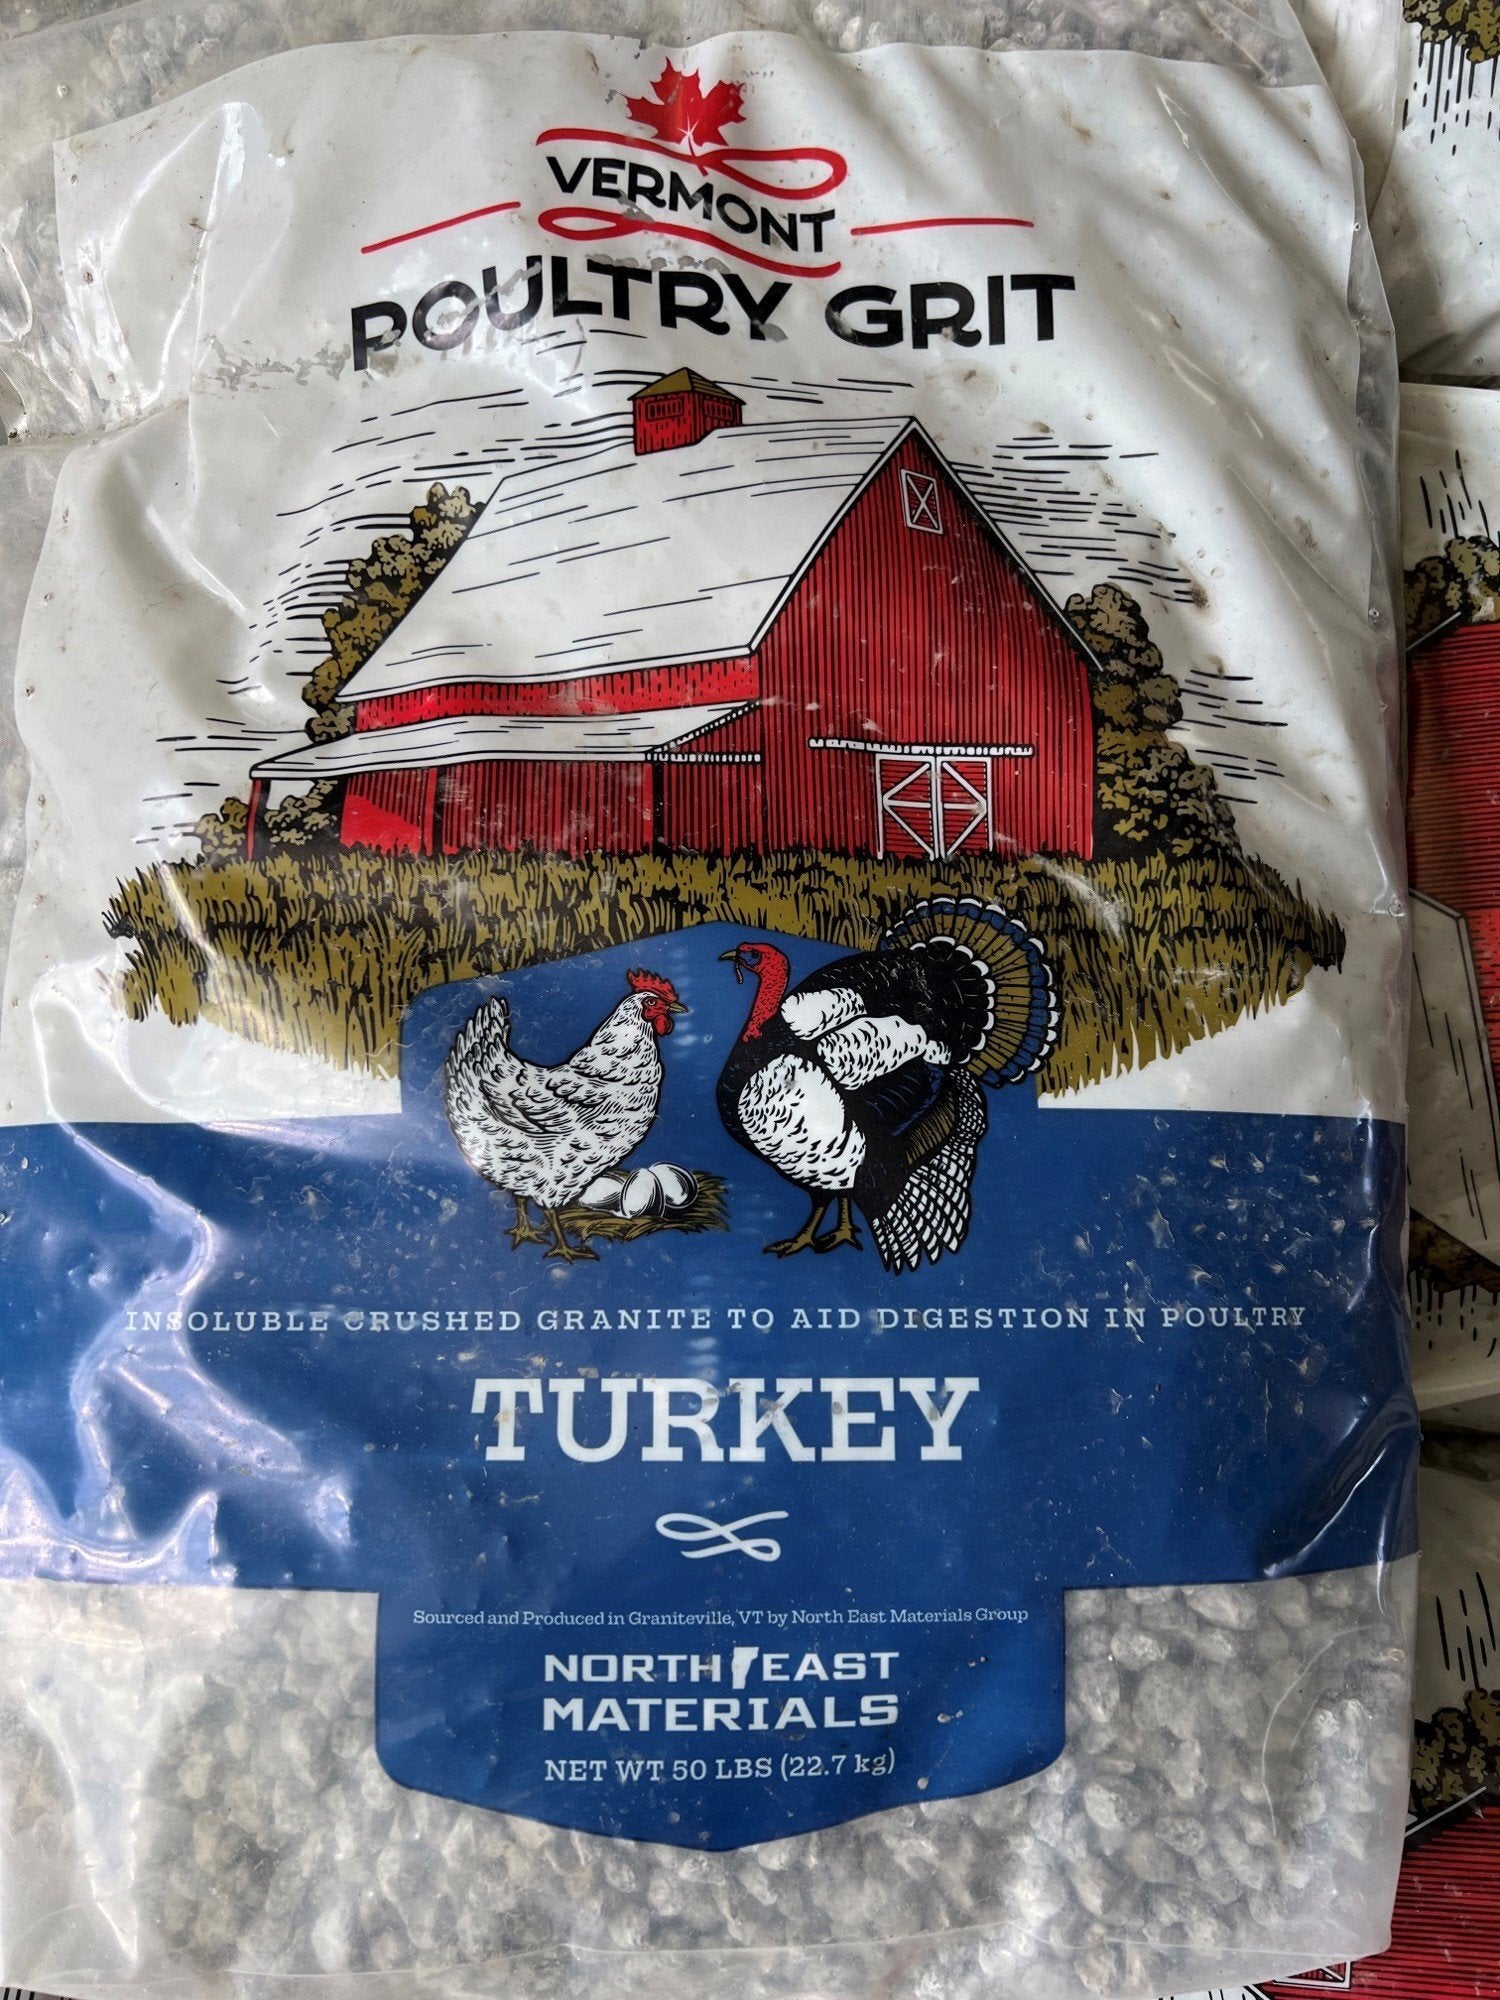 Vermont Poultry Grit - Turkey Finisher